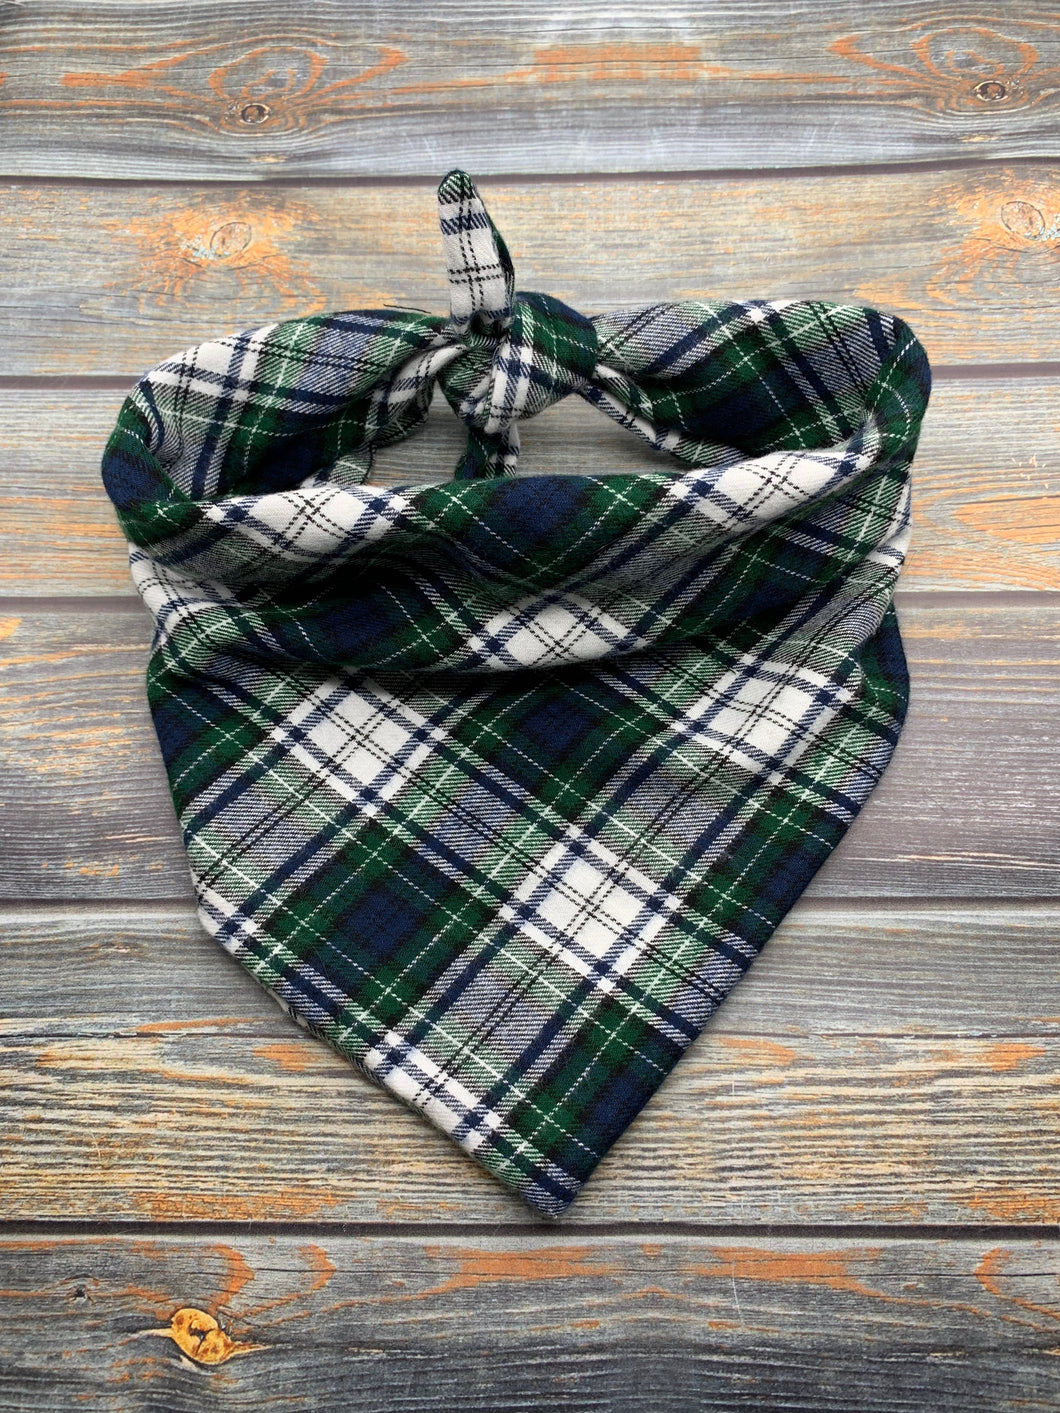 Blue, White, and Green Plaid Flannel